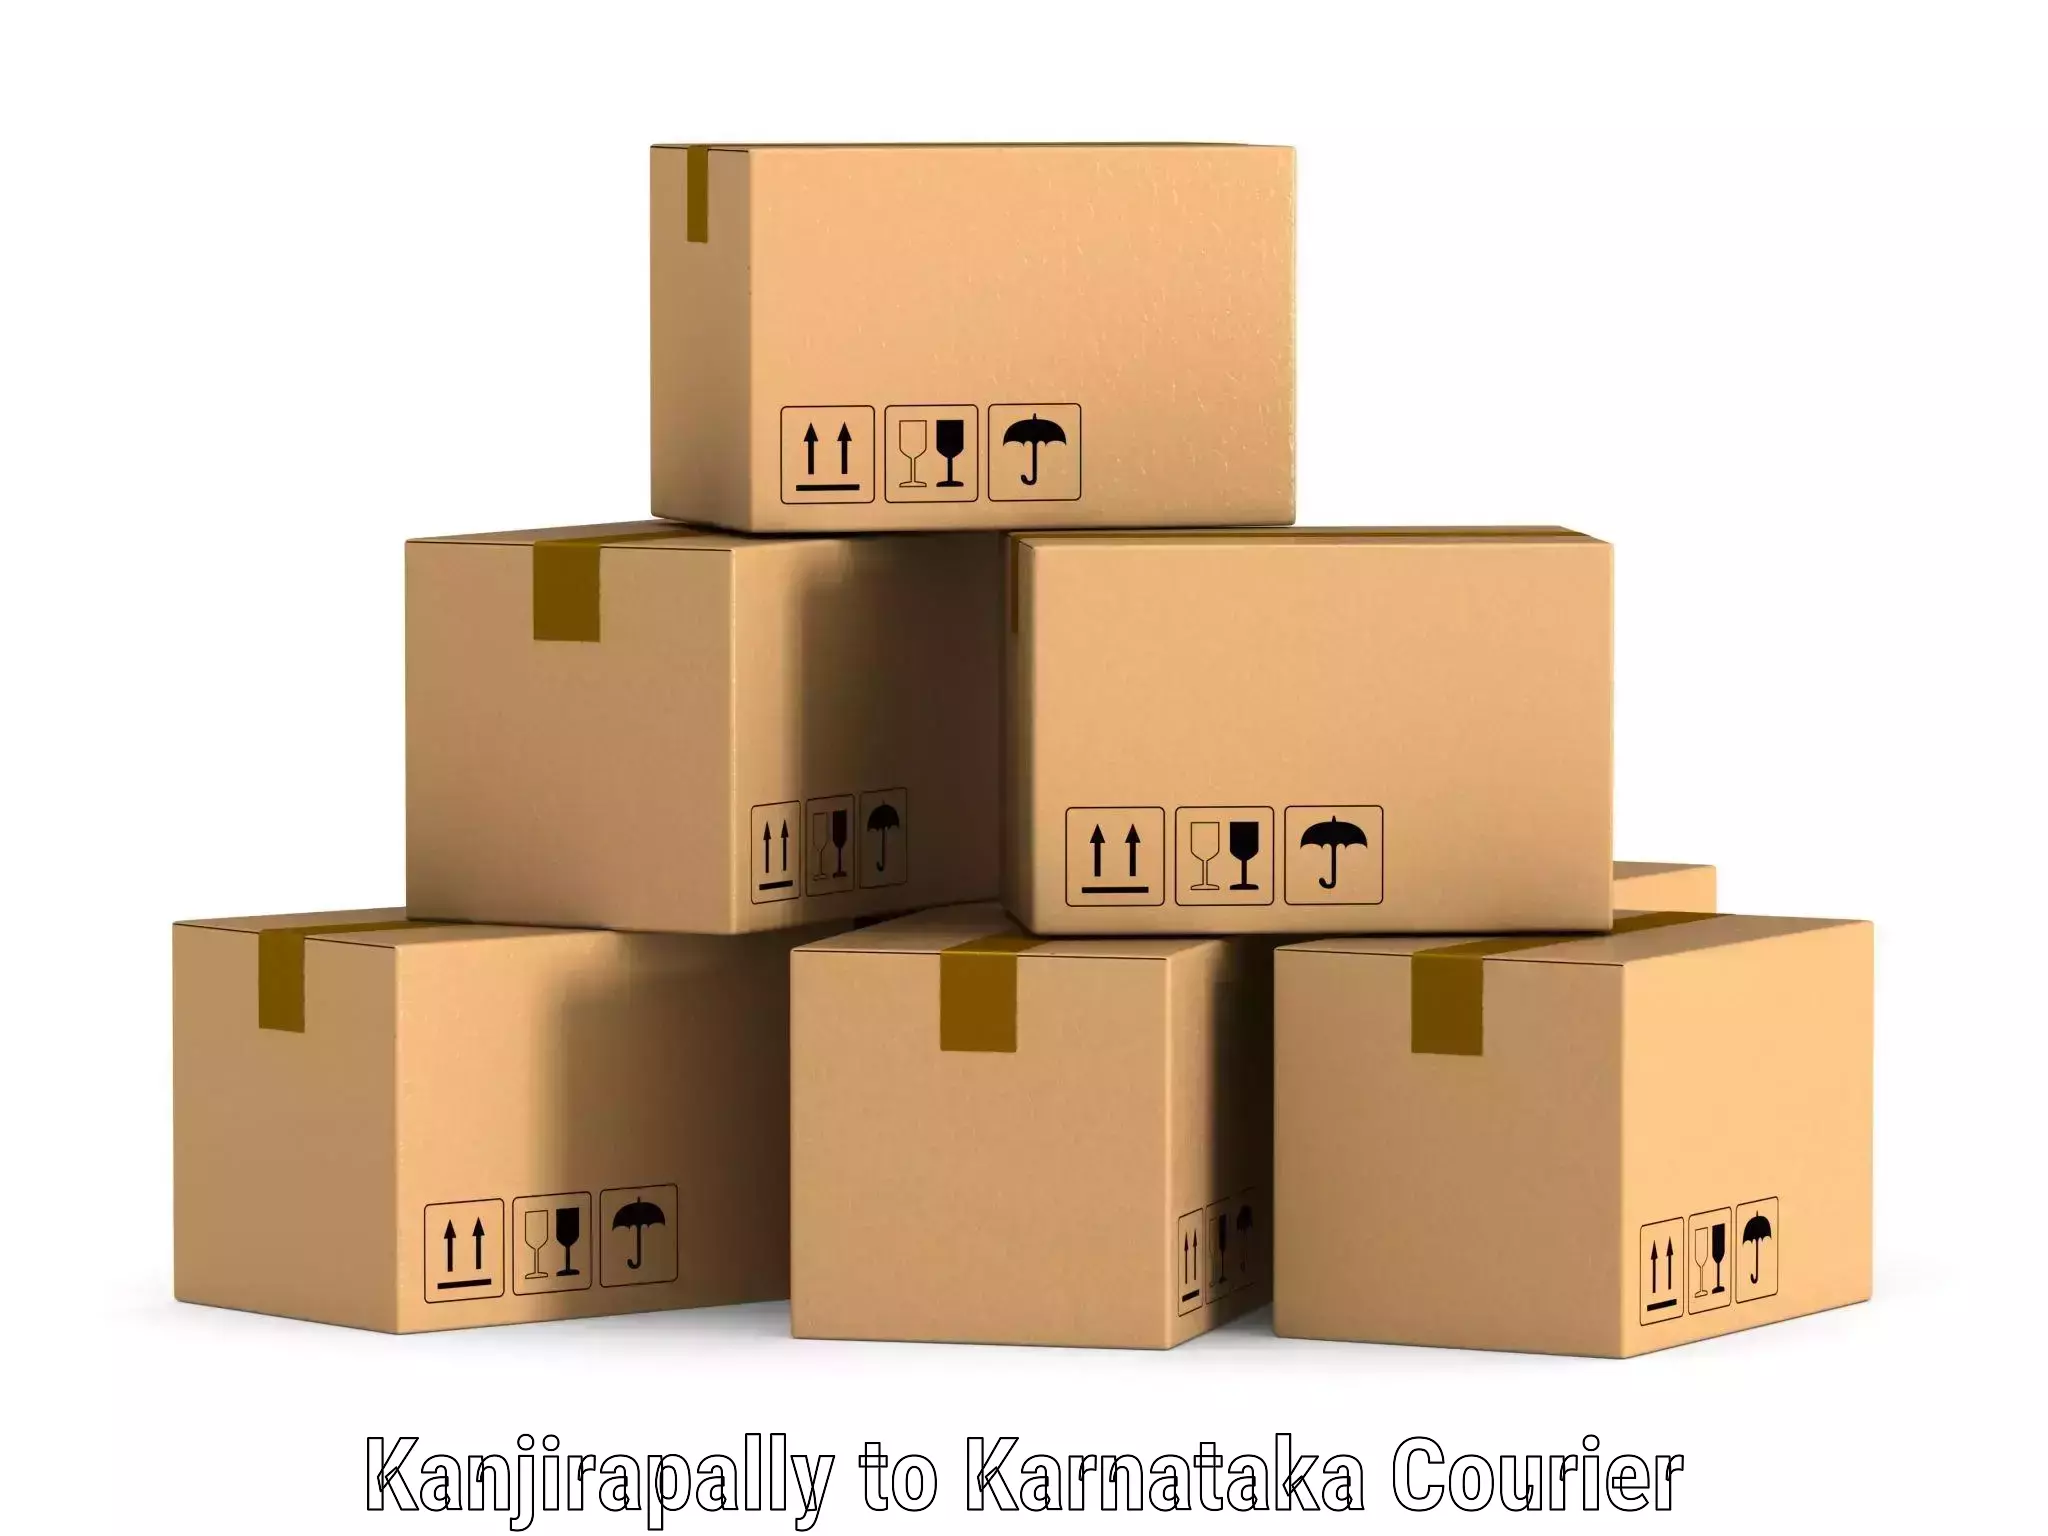 Global shipping solutions in Kanjirapally to Mangalore Port